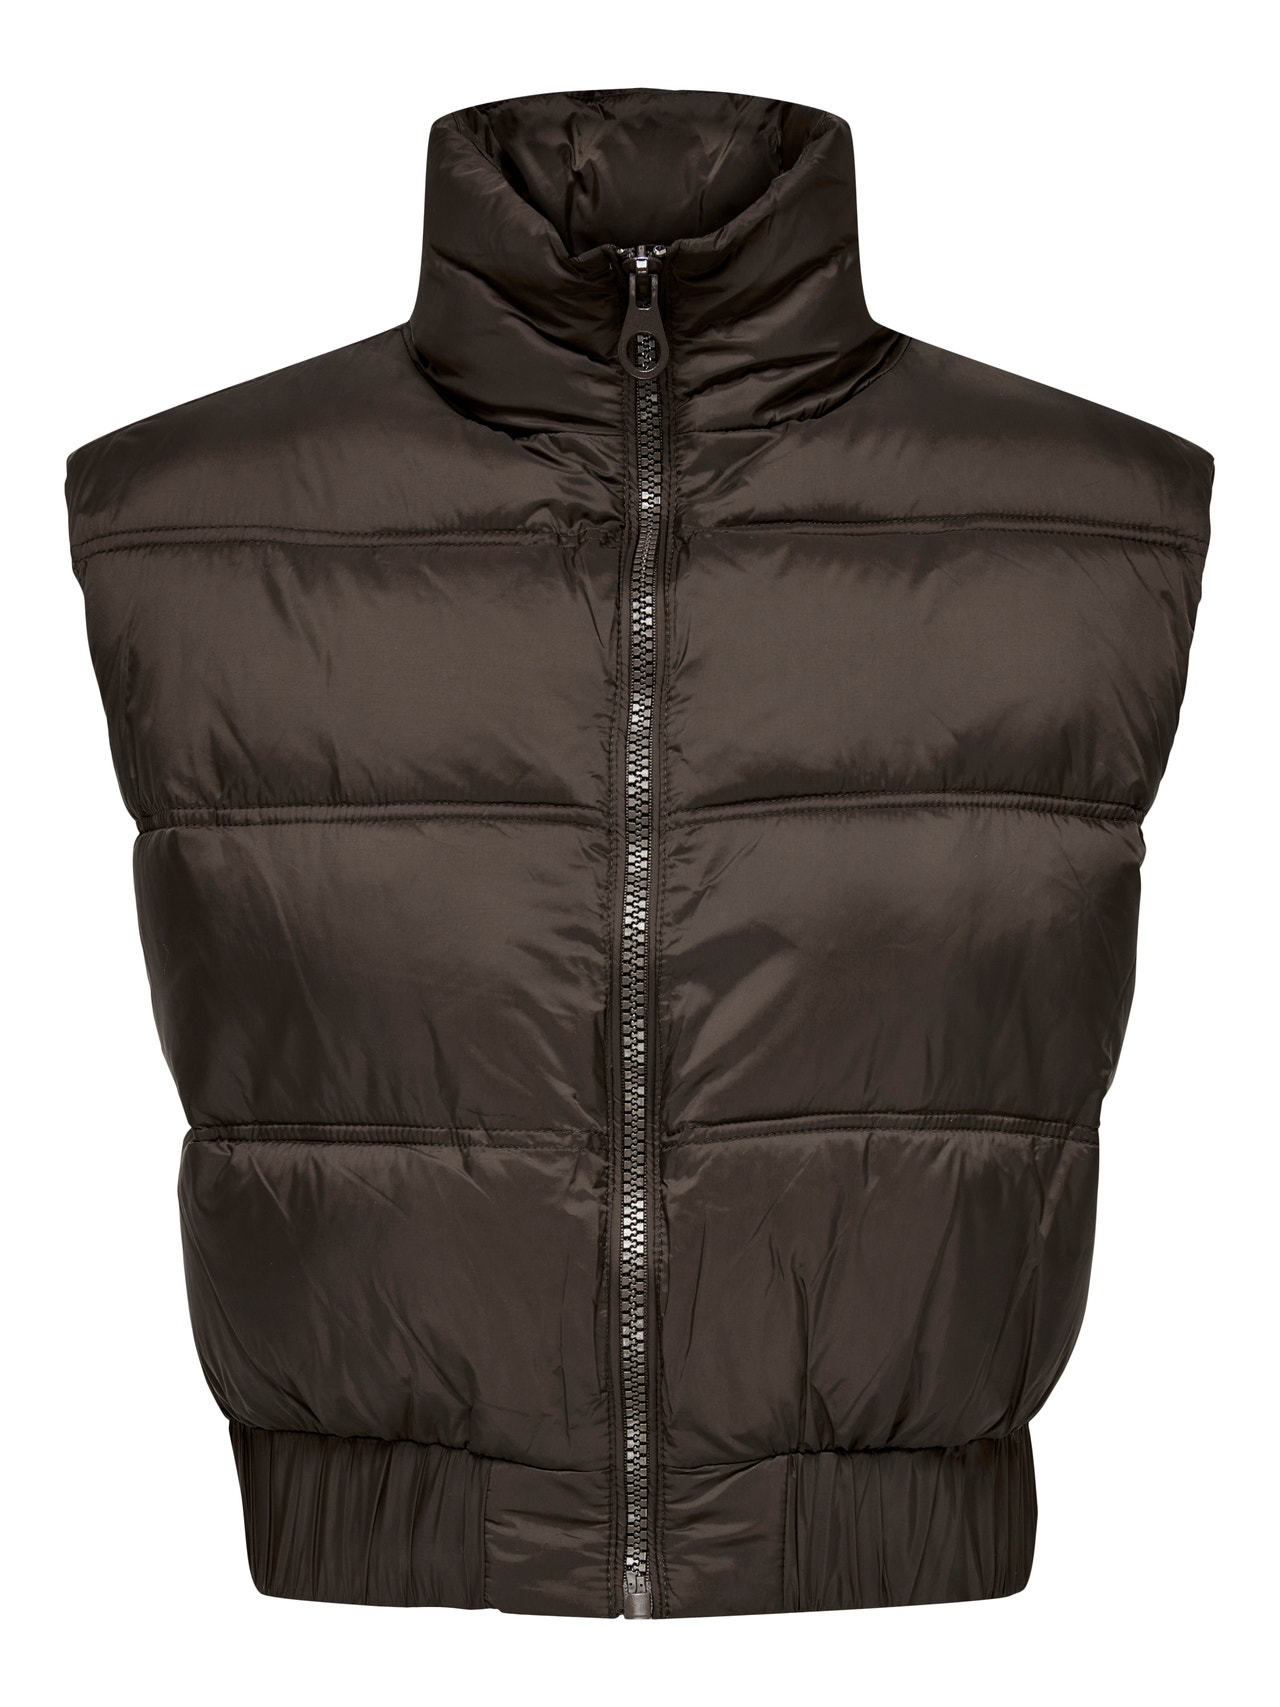 ONLY Gilets anti-froid Col haut -Hot Fudge - 15271103